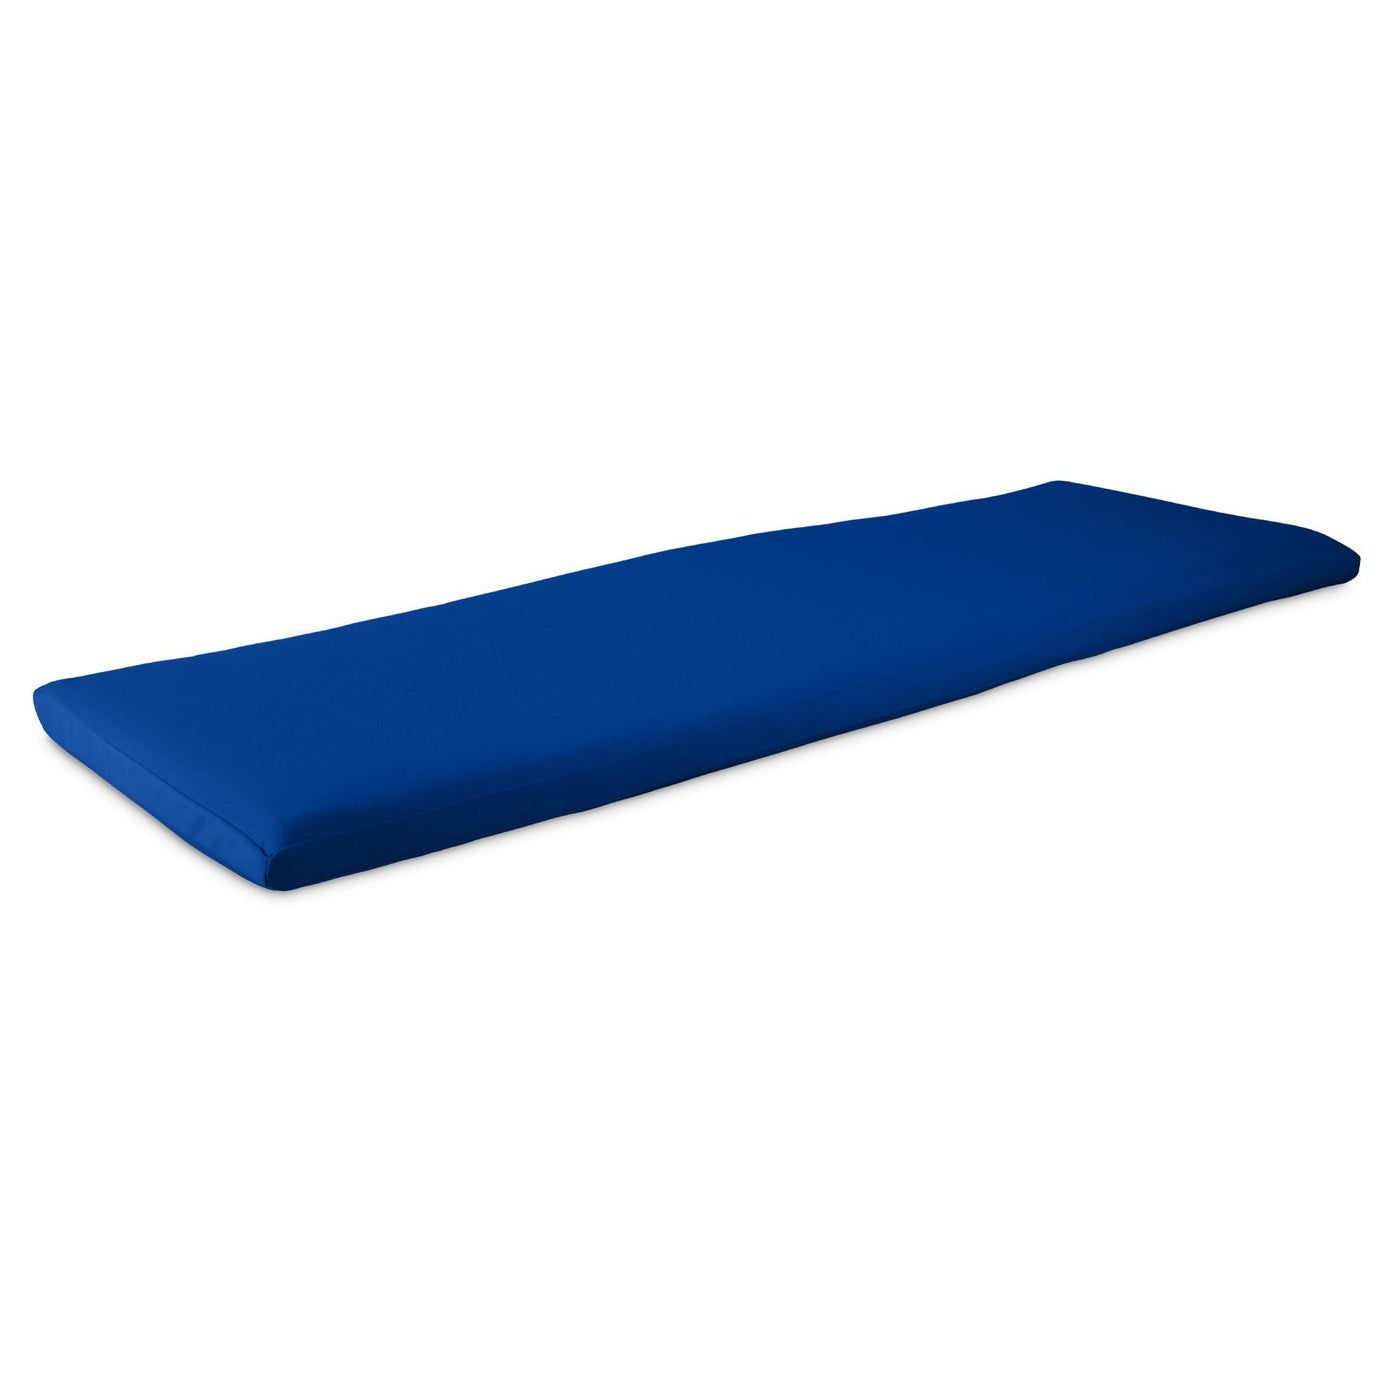 CLOSEOUT 5ft Swing and Bench 59 x 19 x 2 Water Resistant Outdoor Cushion Highwood USA Cobalt Blue 